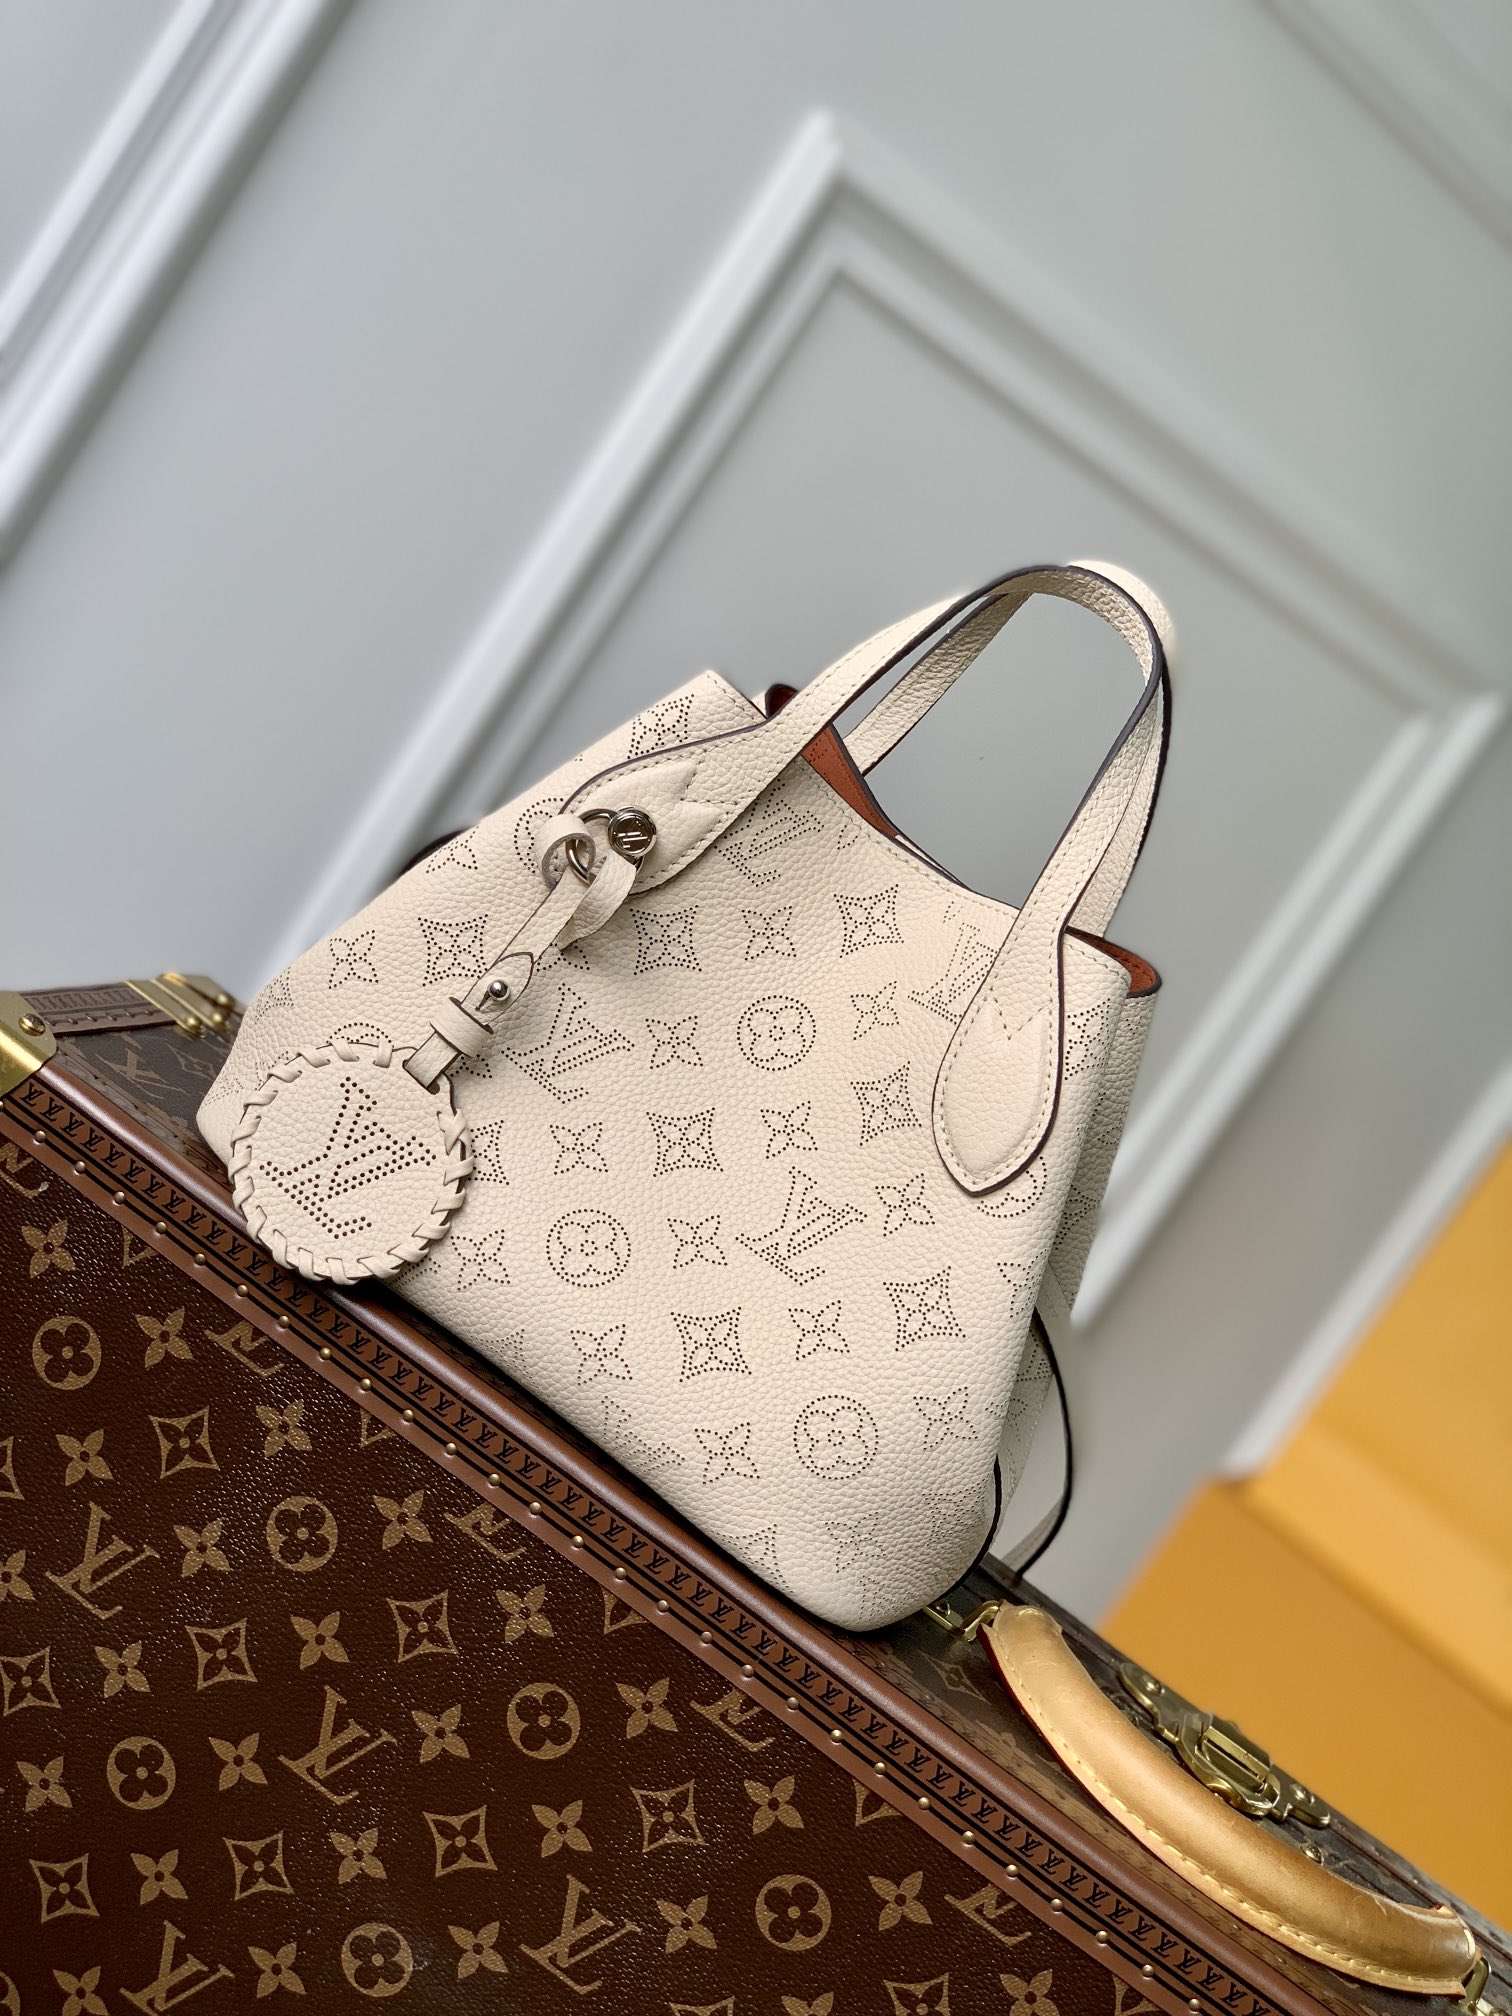 Replica Louis Vuitton Blossom PM Bag In Galet Mahina Leather M21849